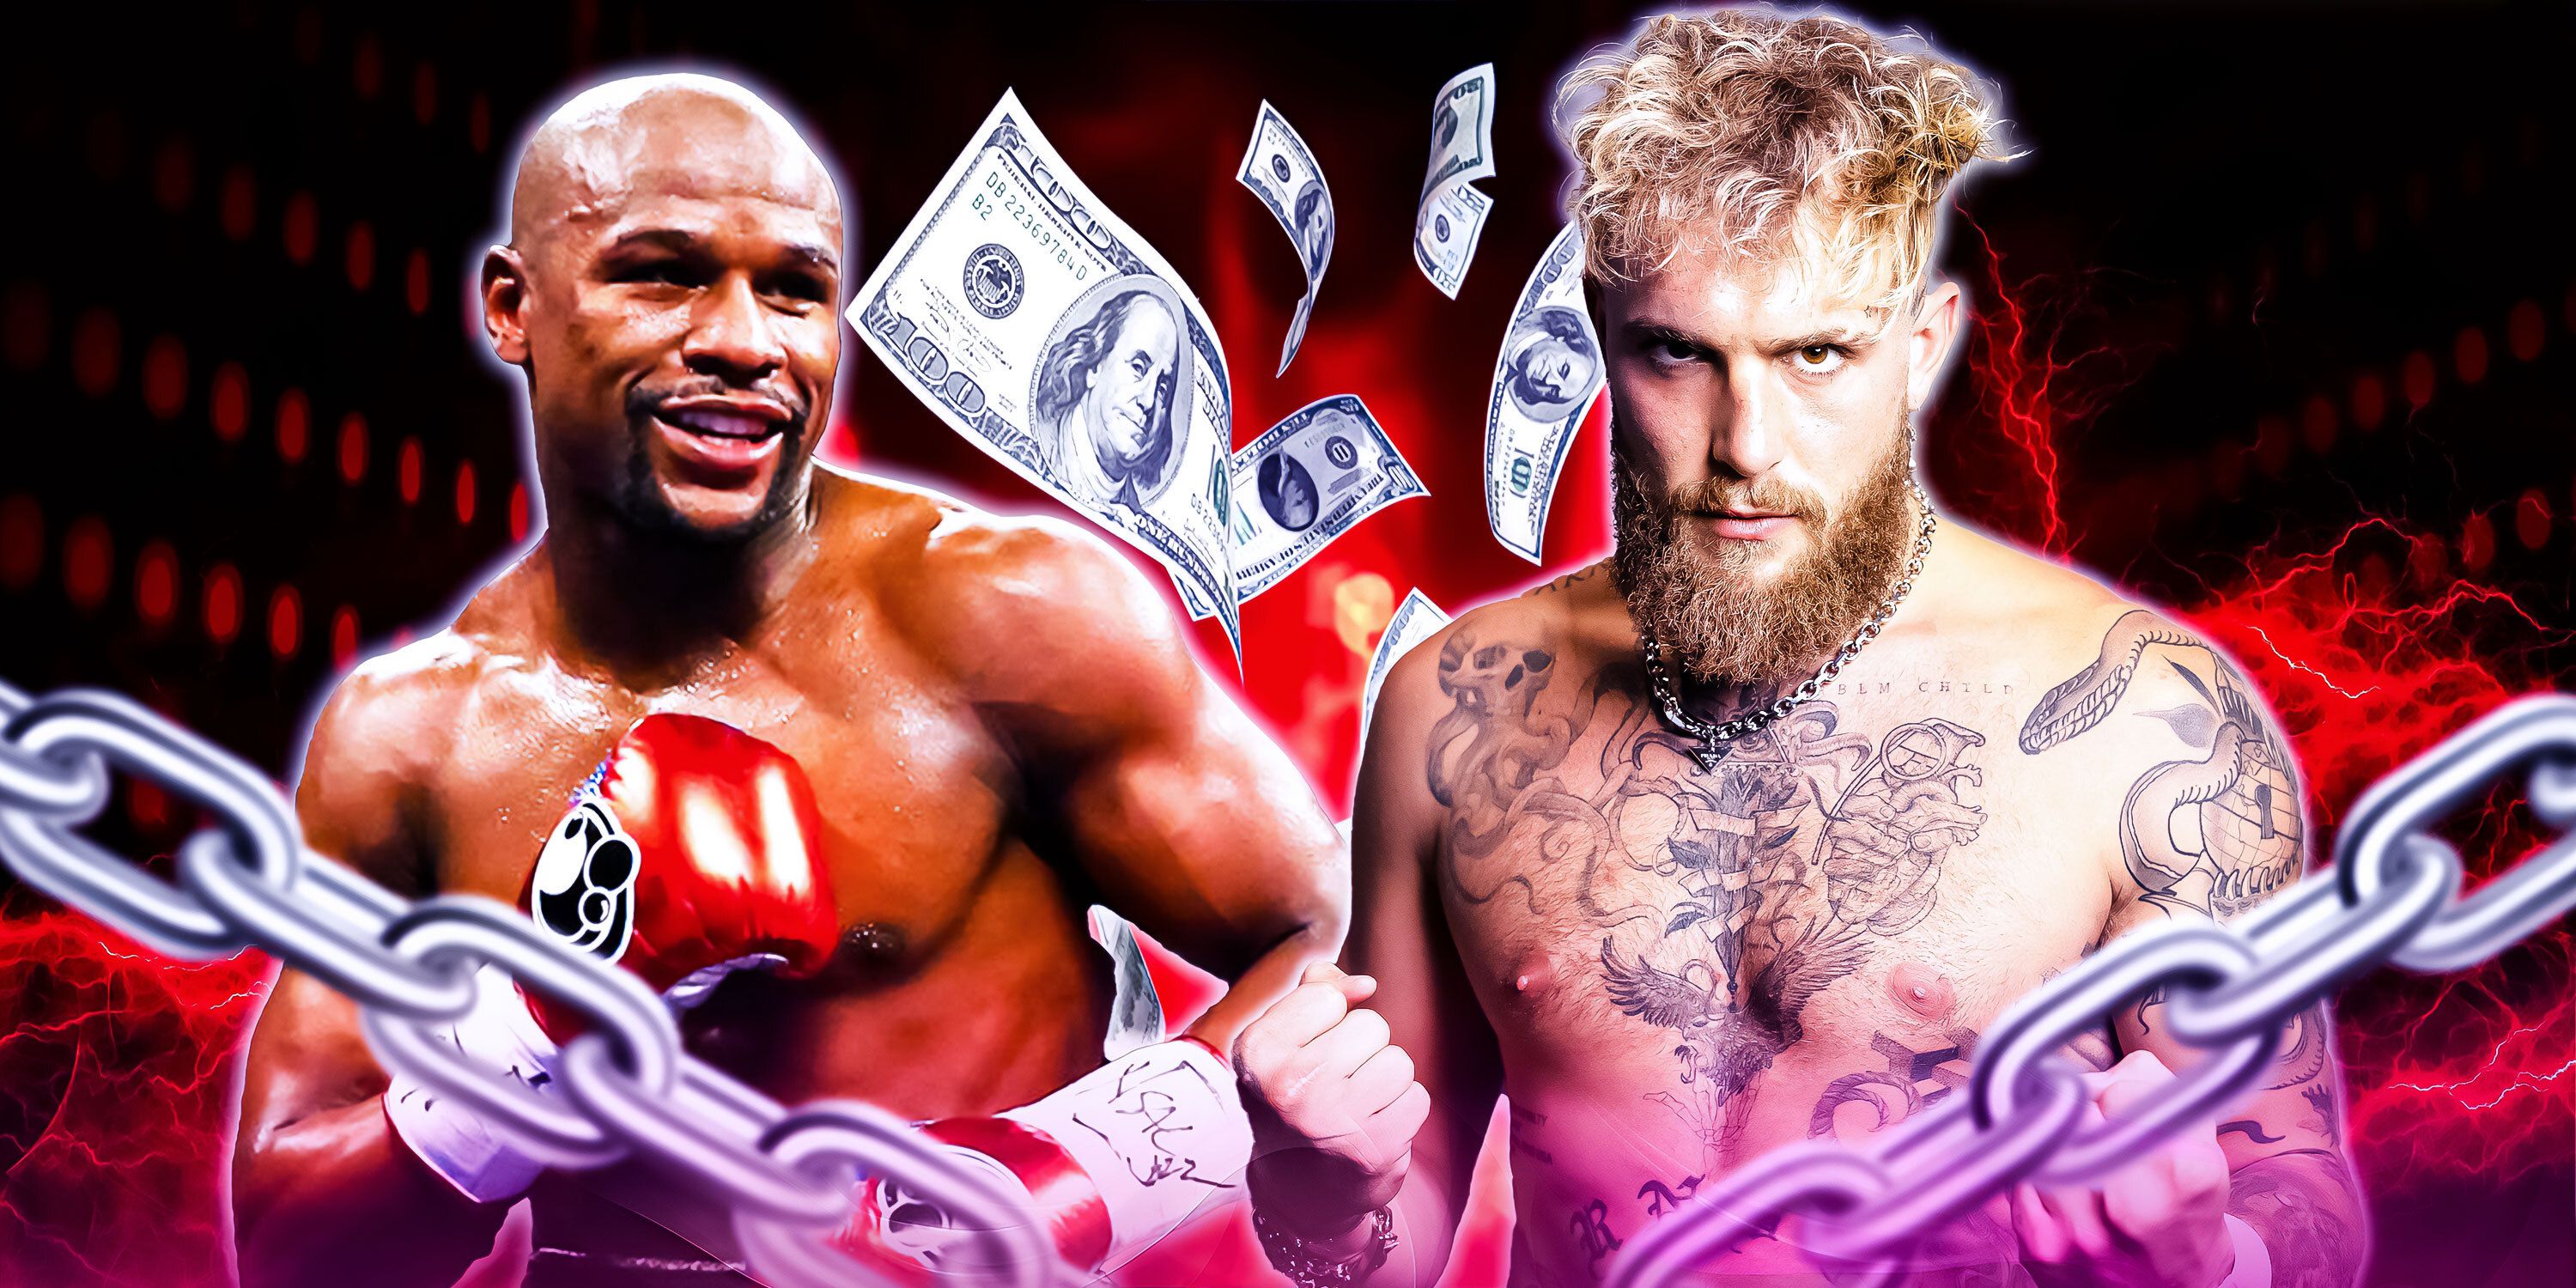 Why-Jake-Paul's-2021-Bust-Up-With-Floyd-Mayweather-Cost-Him-Millions